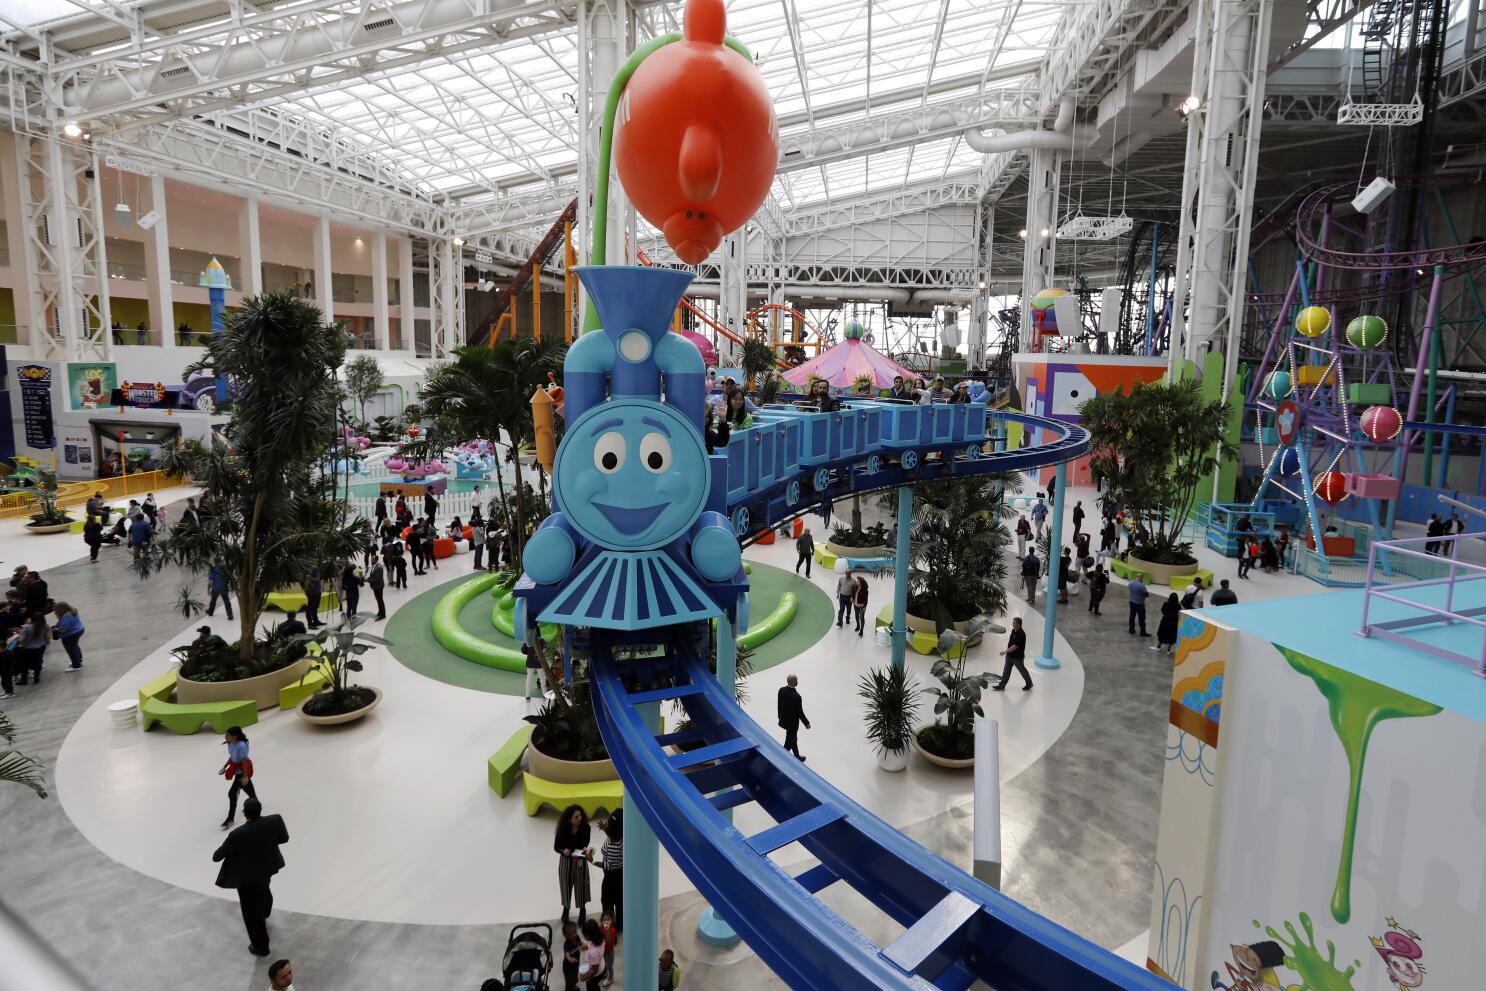 Biggest Malls in the US: Mall of America, American Dream, and More